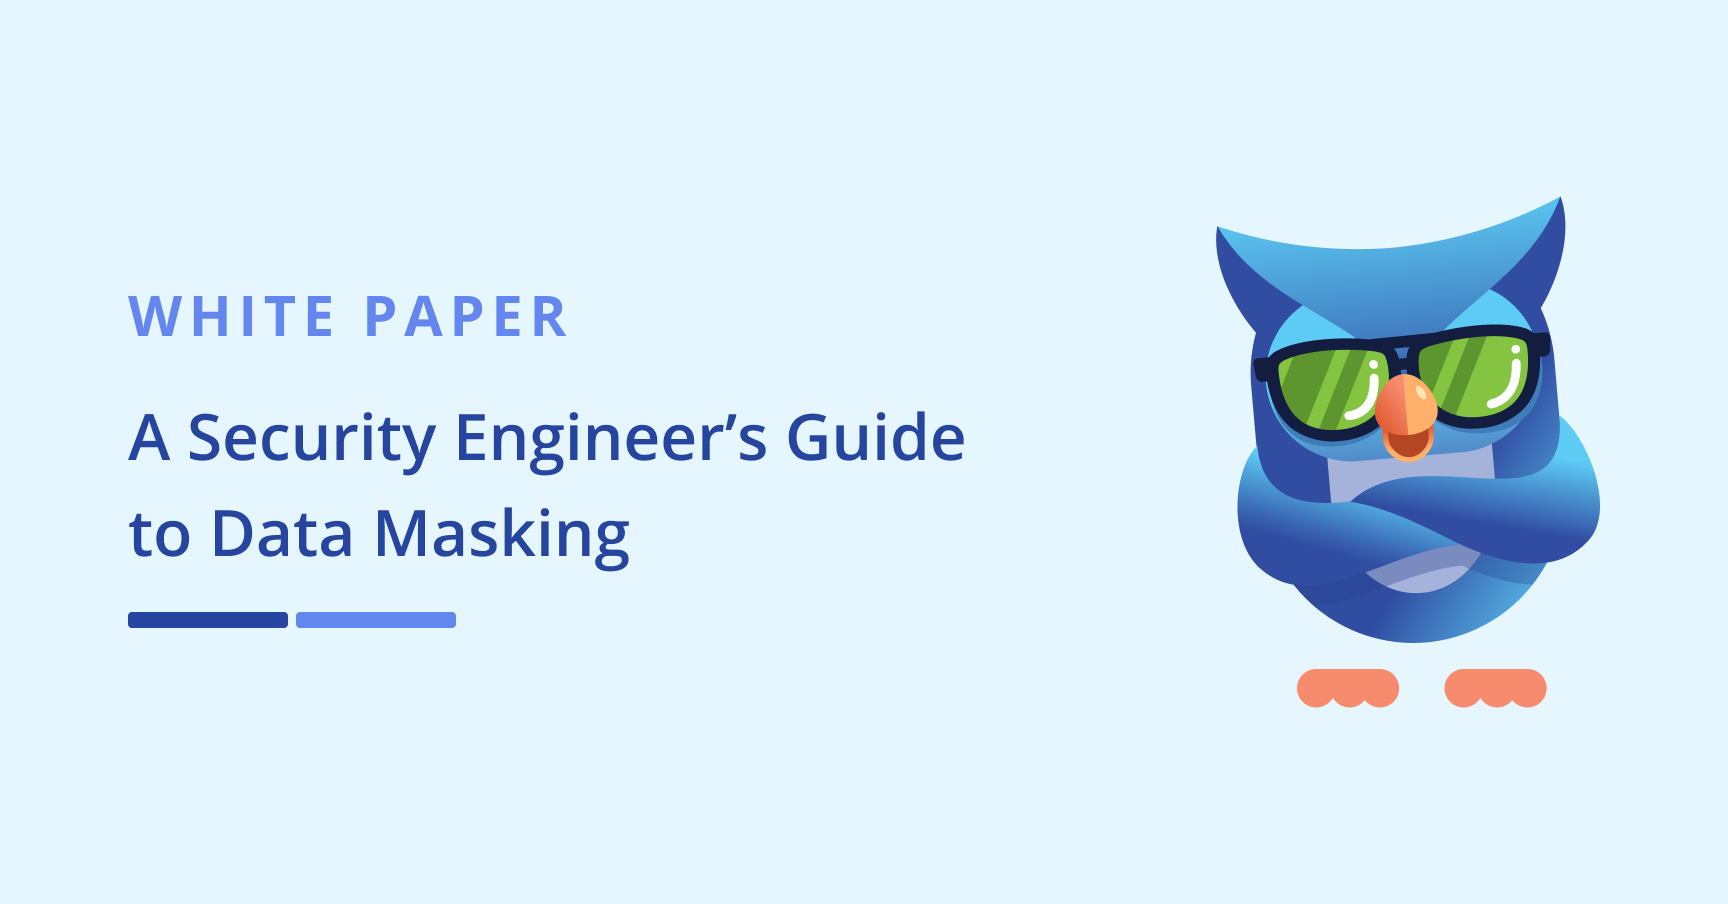 Security Engineer's Guide to Data Masking - White Paper